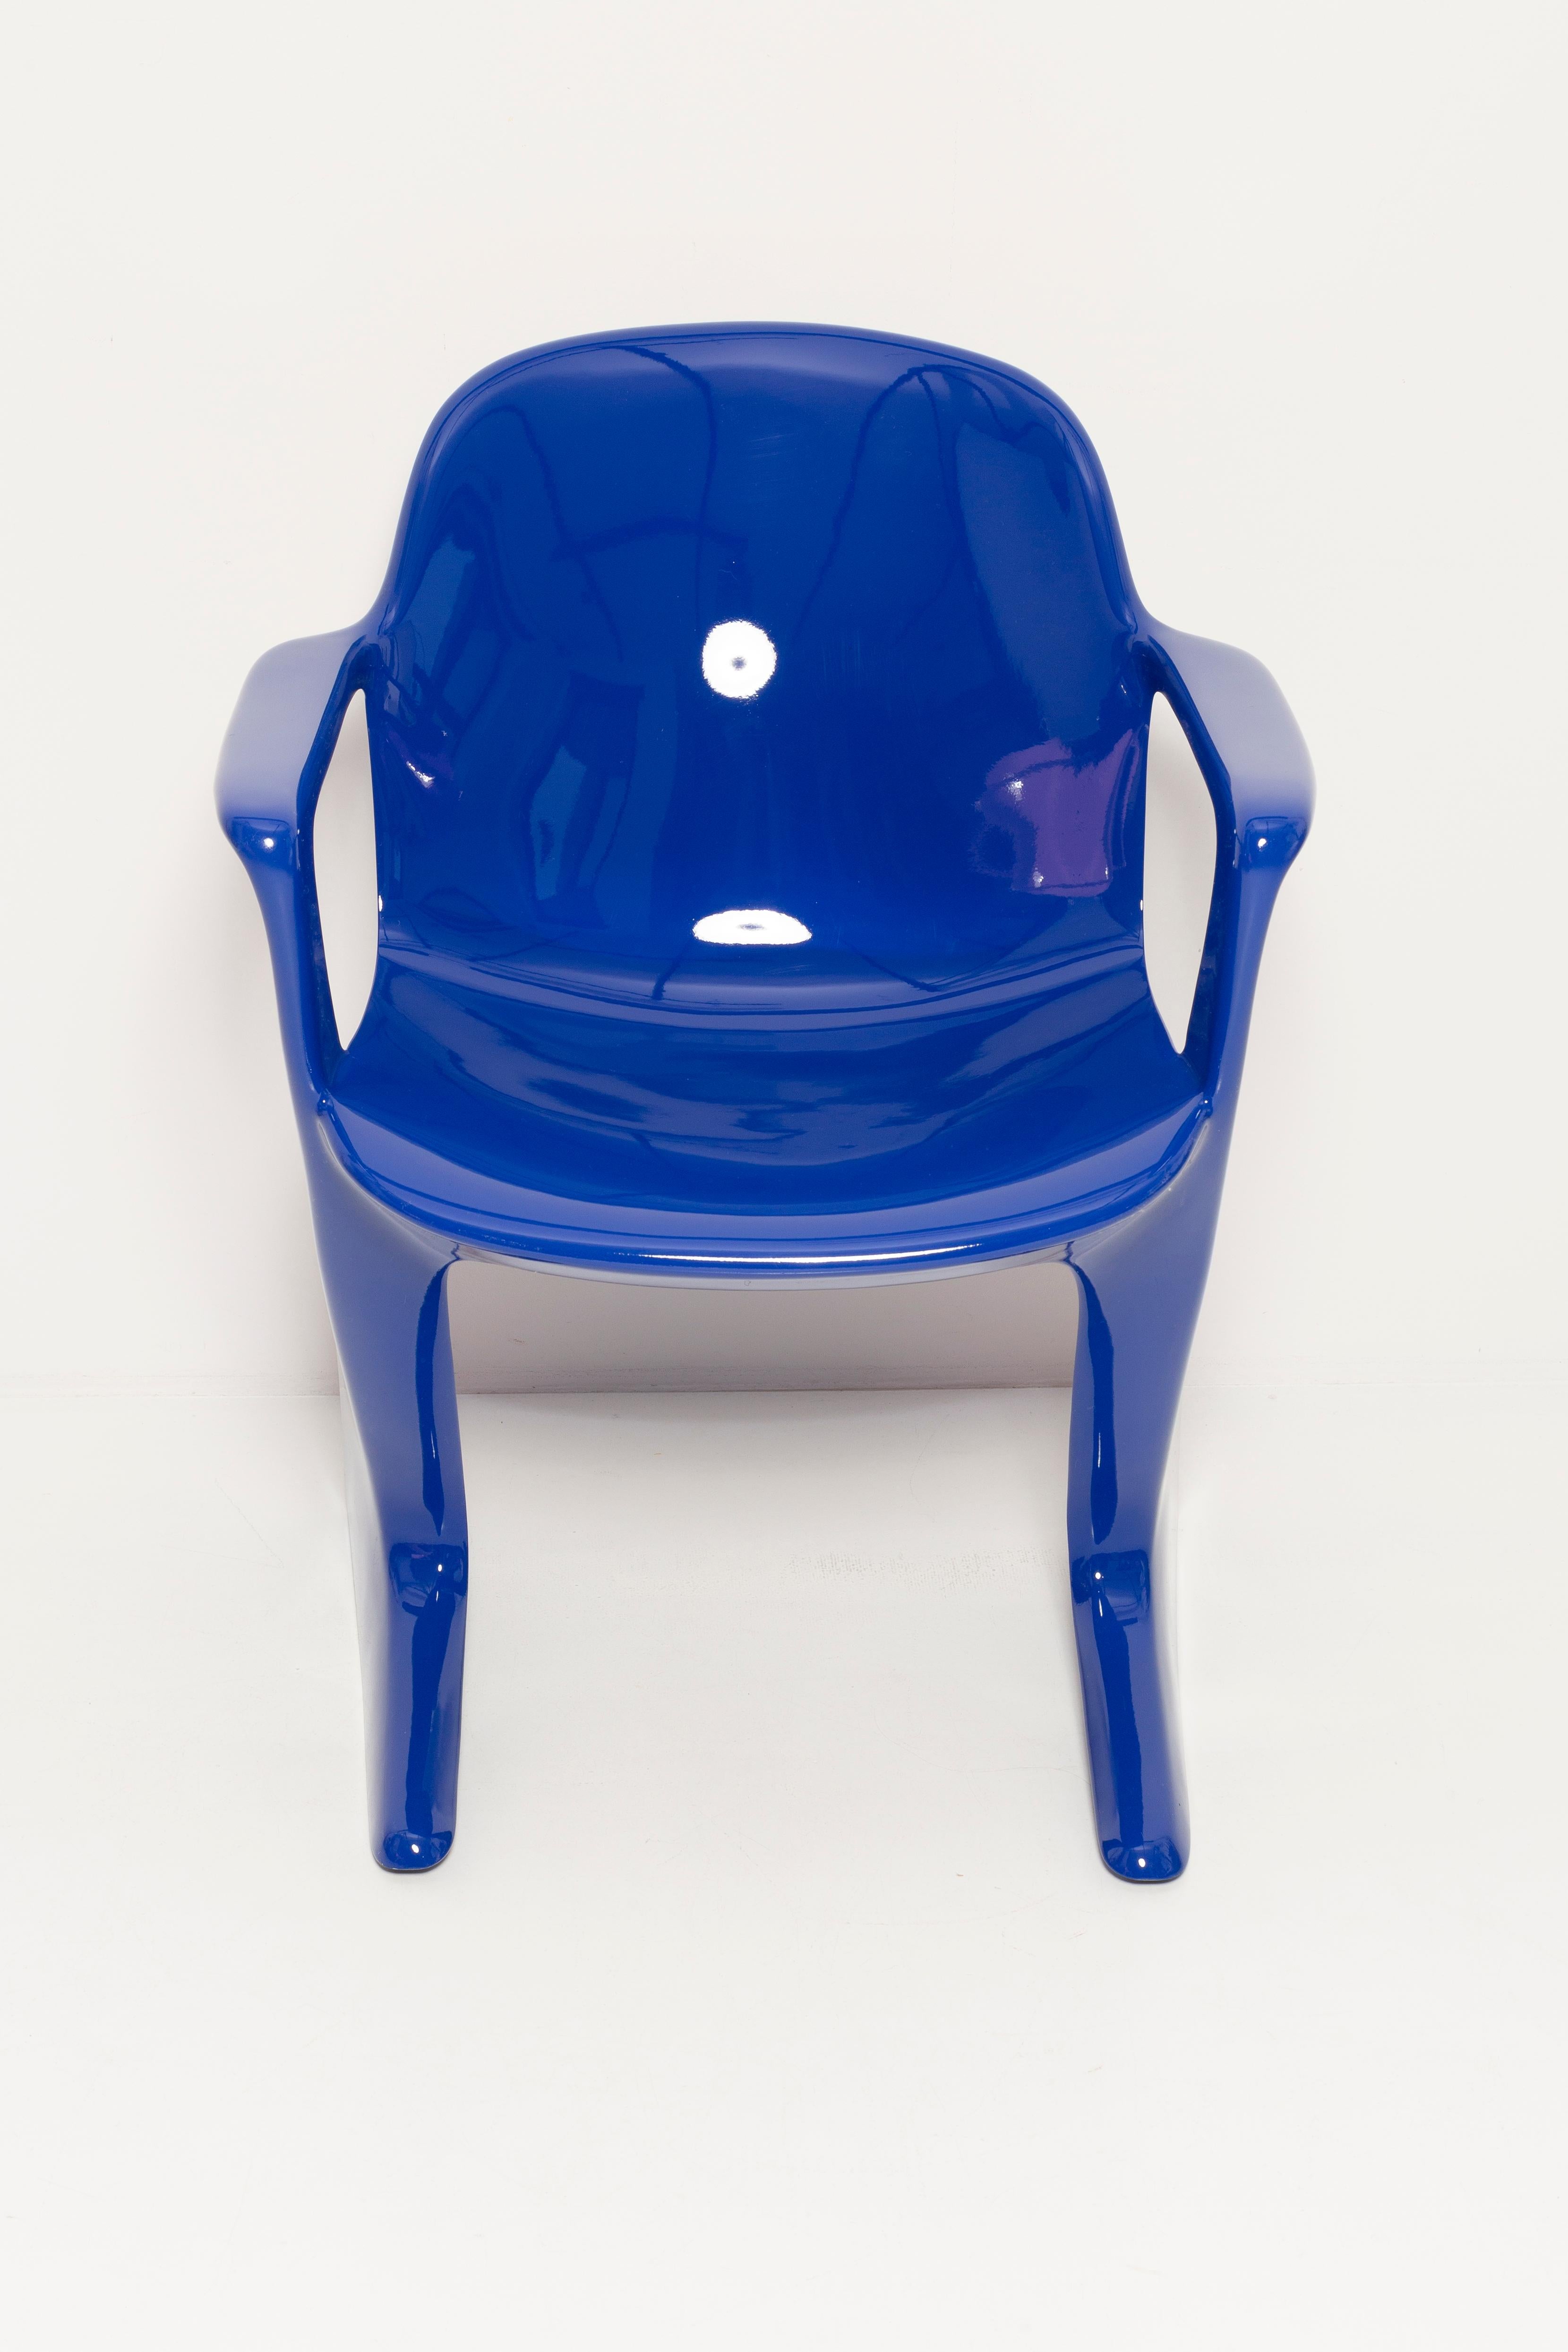 20th Century Set of Eight Ultramarine Blue Kangaroo Chairs, by Ernst Moeckl, Germany, 1968 For Sale